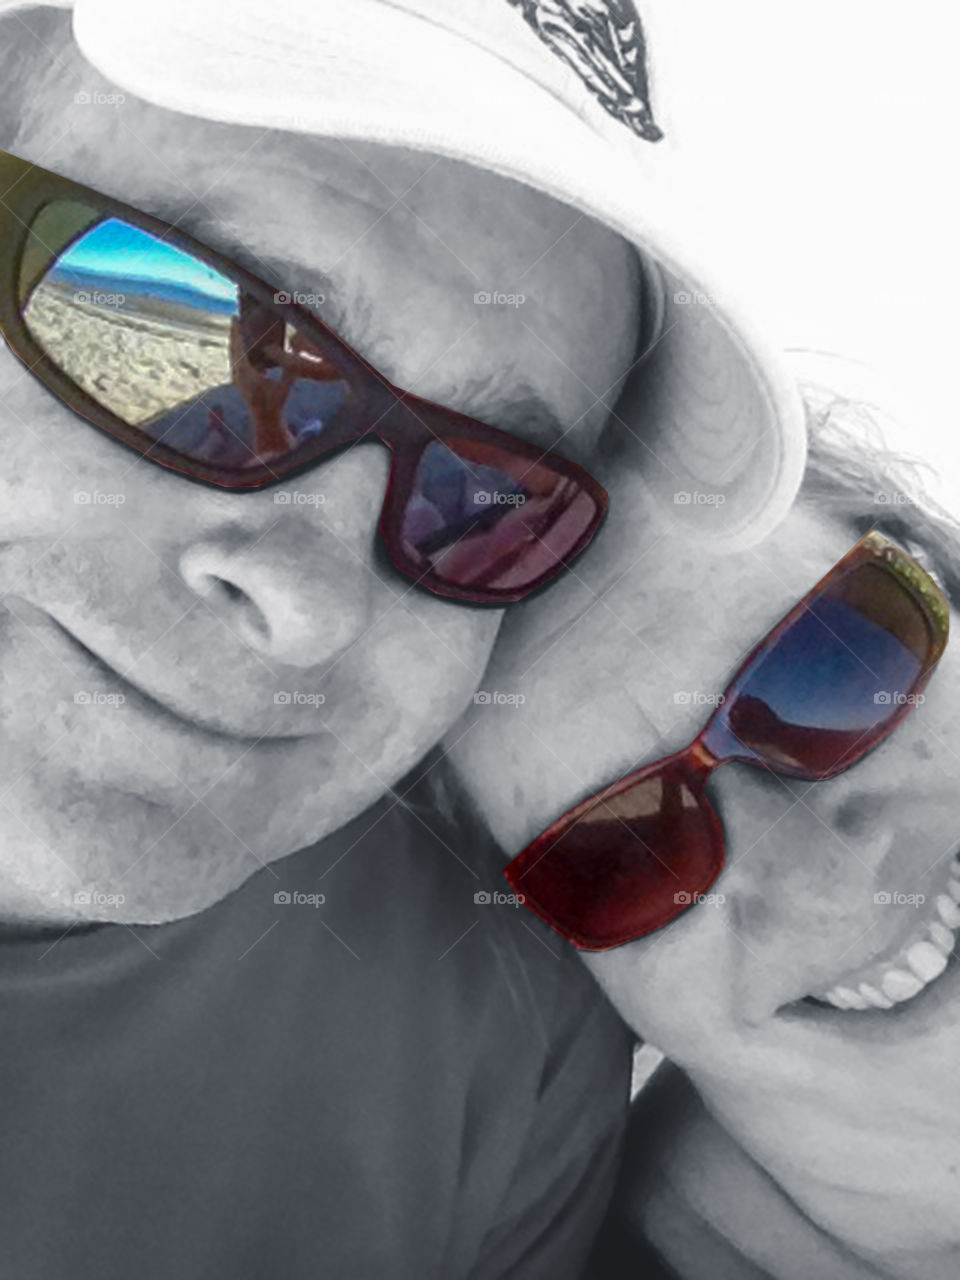 A selfie of a husband & wife at the beach. The photo is primarily B&W except for the brown sunglasses and reflections. The reflections show; the sandy beach,  the iphone, body parts & the ocean, mountains & sky in varying shades of beautiful blue! 💙